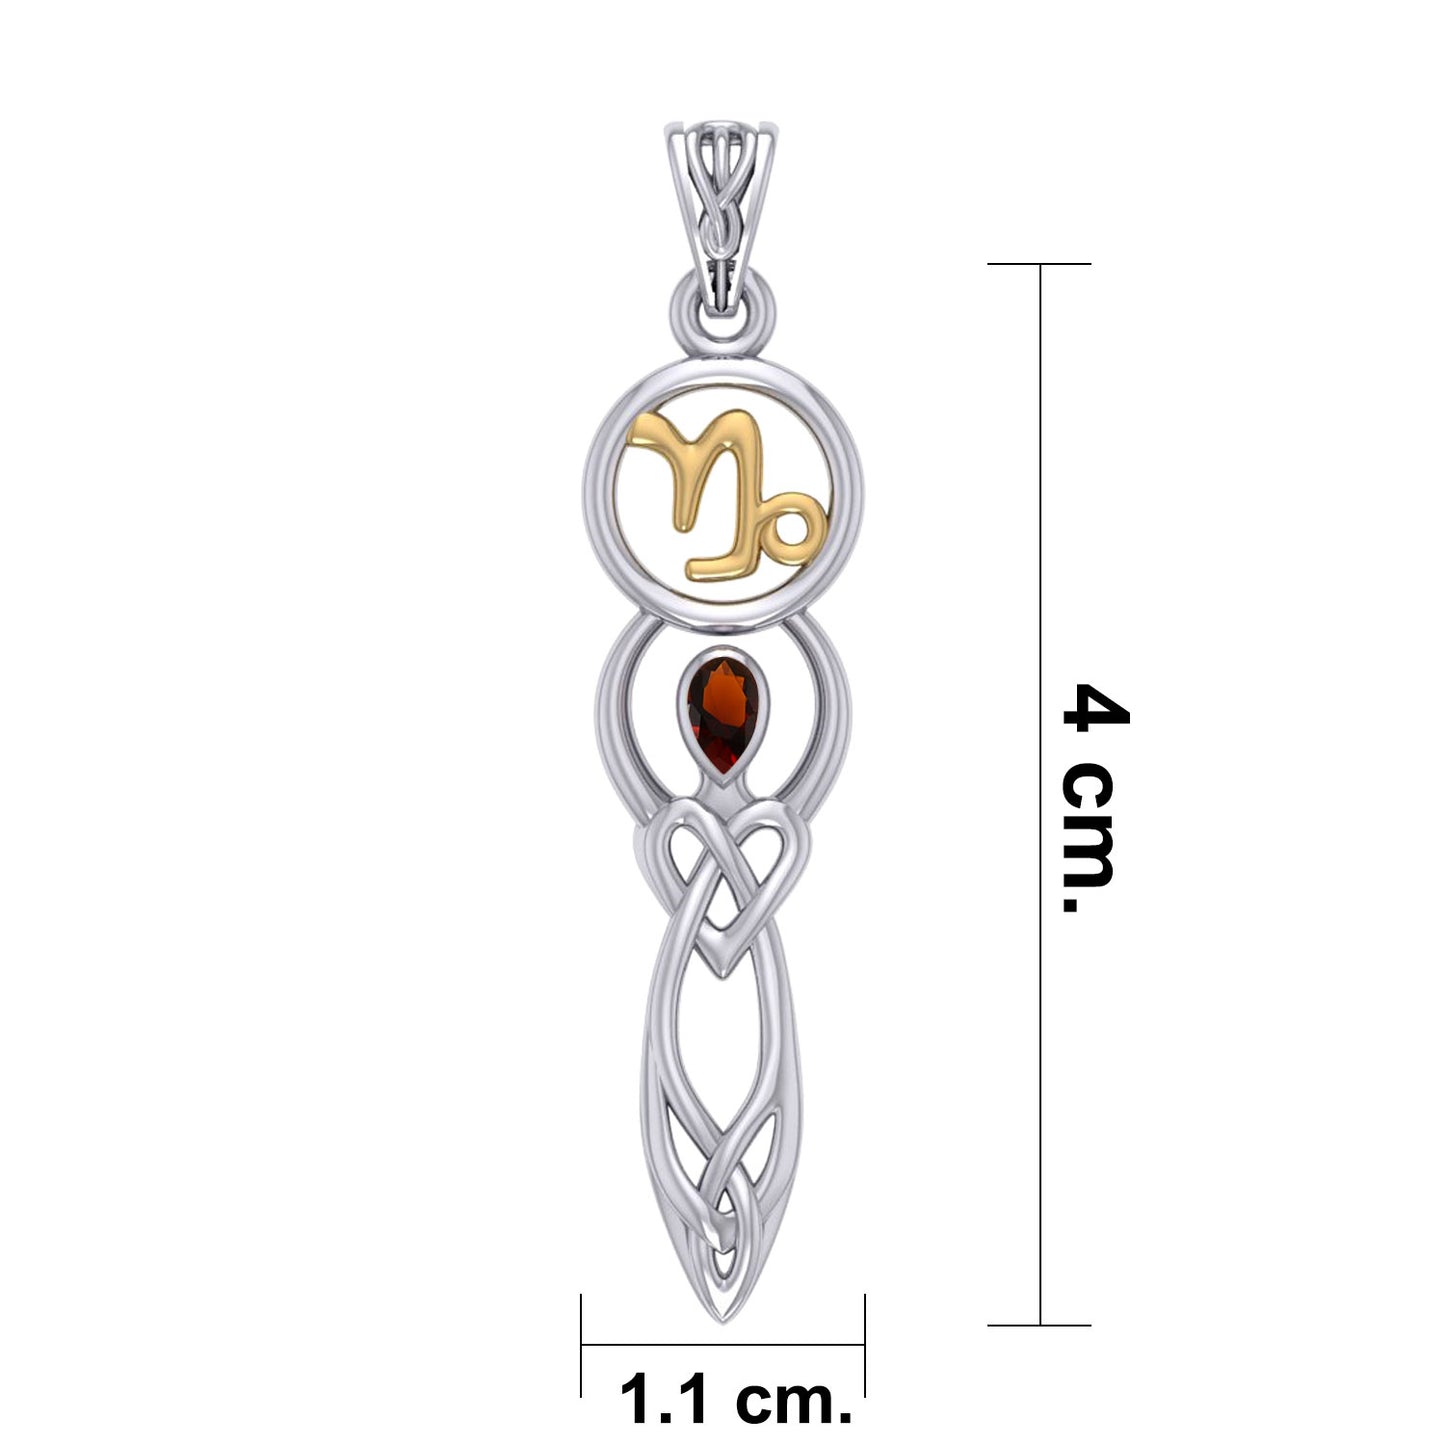 Celtic Goddess Capricorn Astrology Zodiac Sign Silver and Gold Accents Pendant with Garnet MPD5932